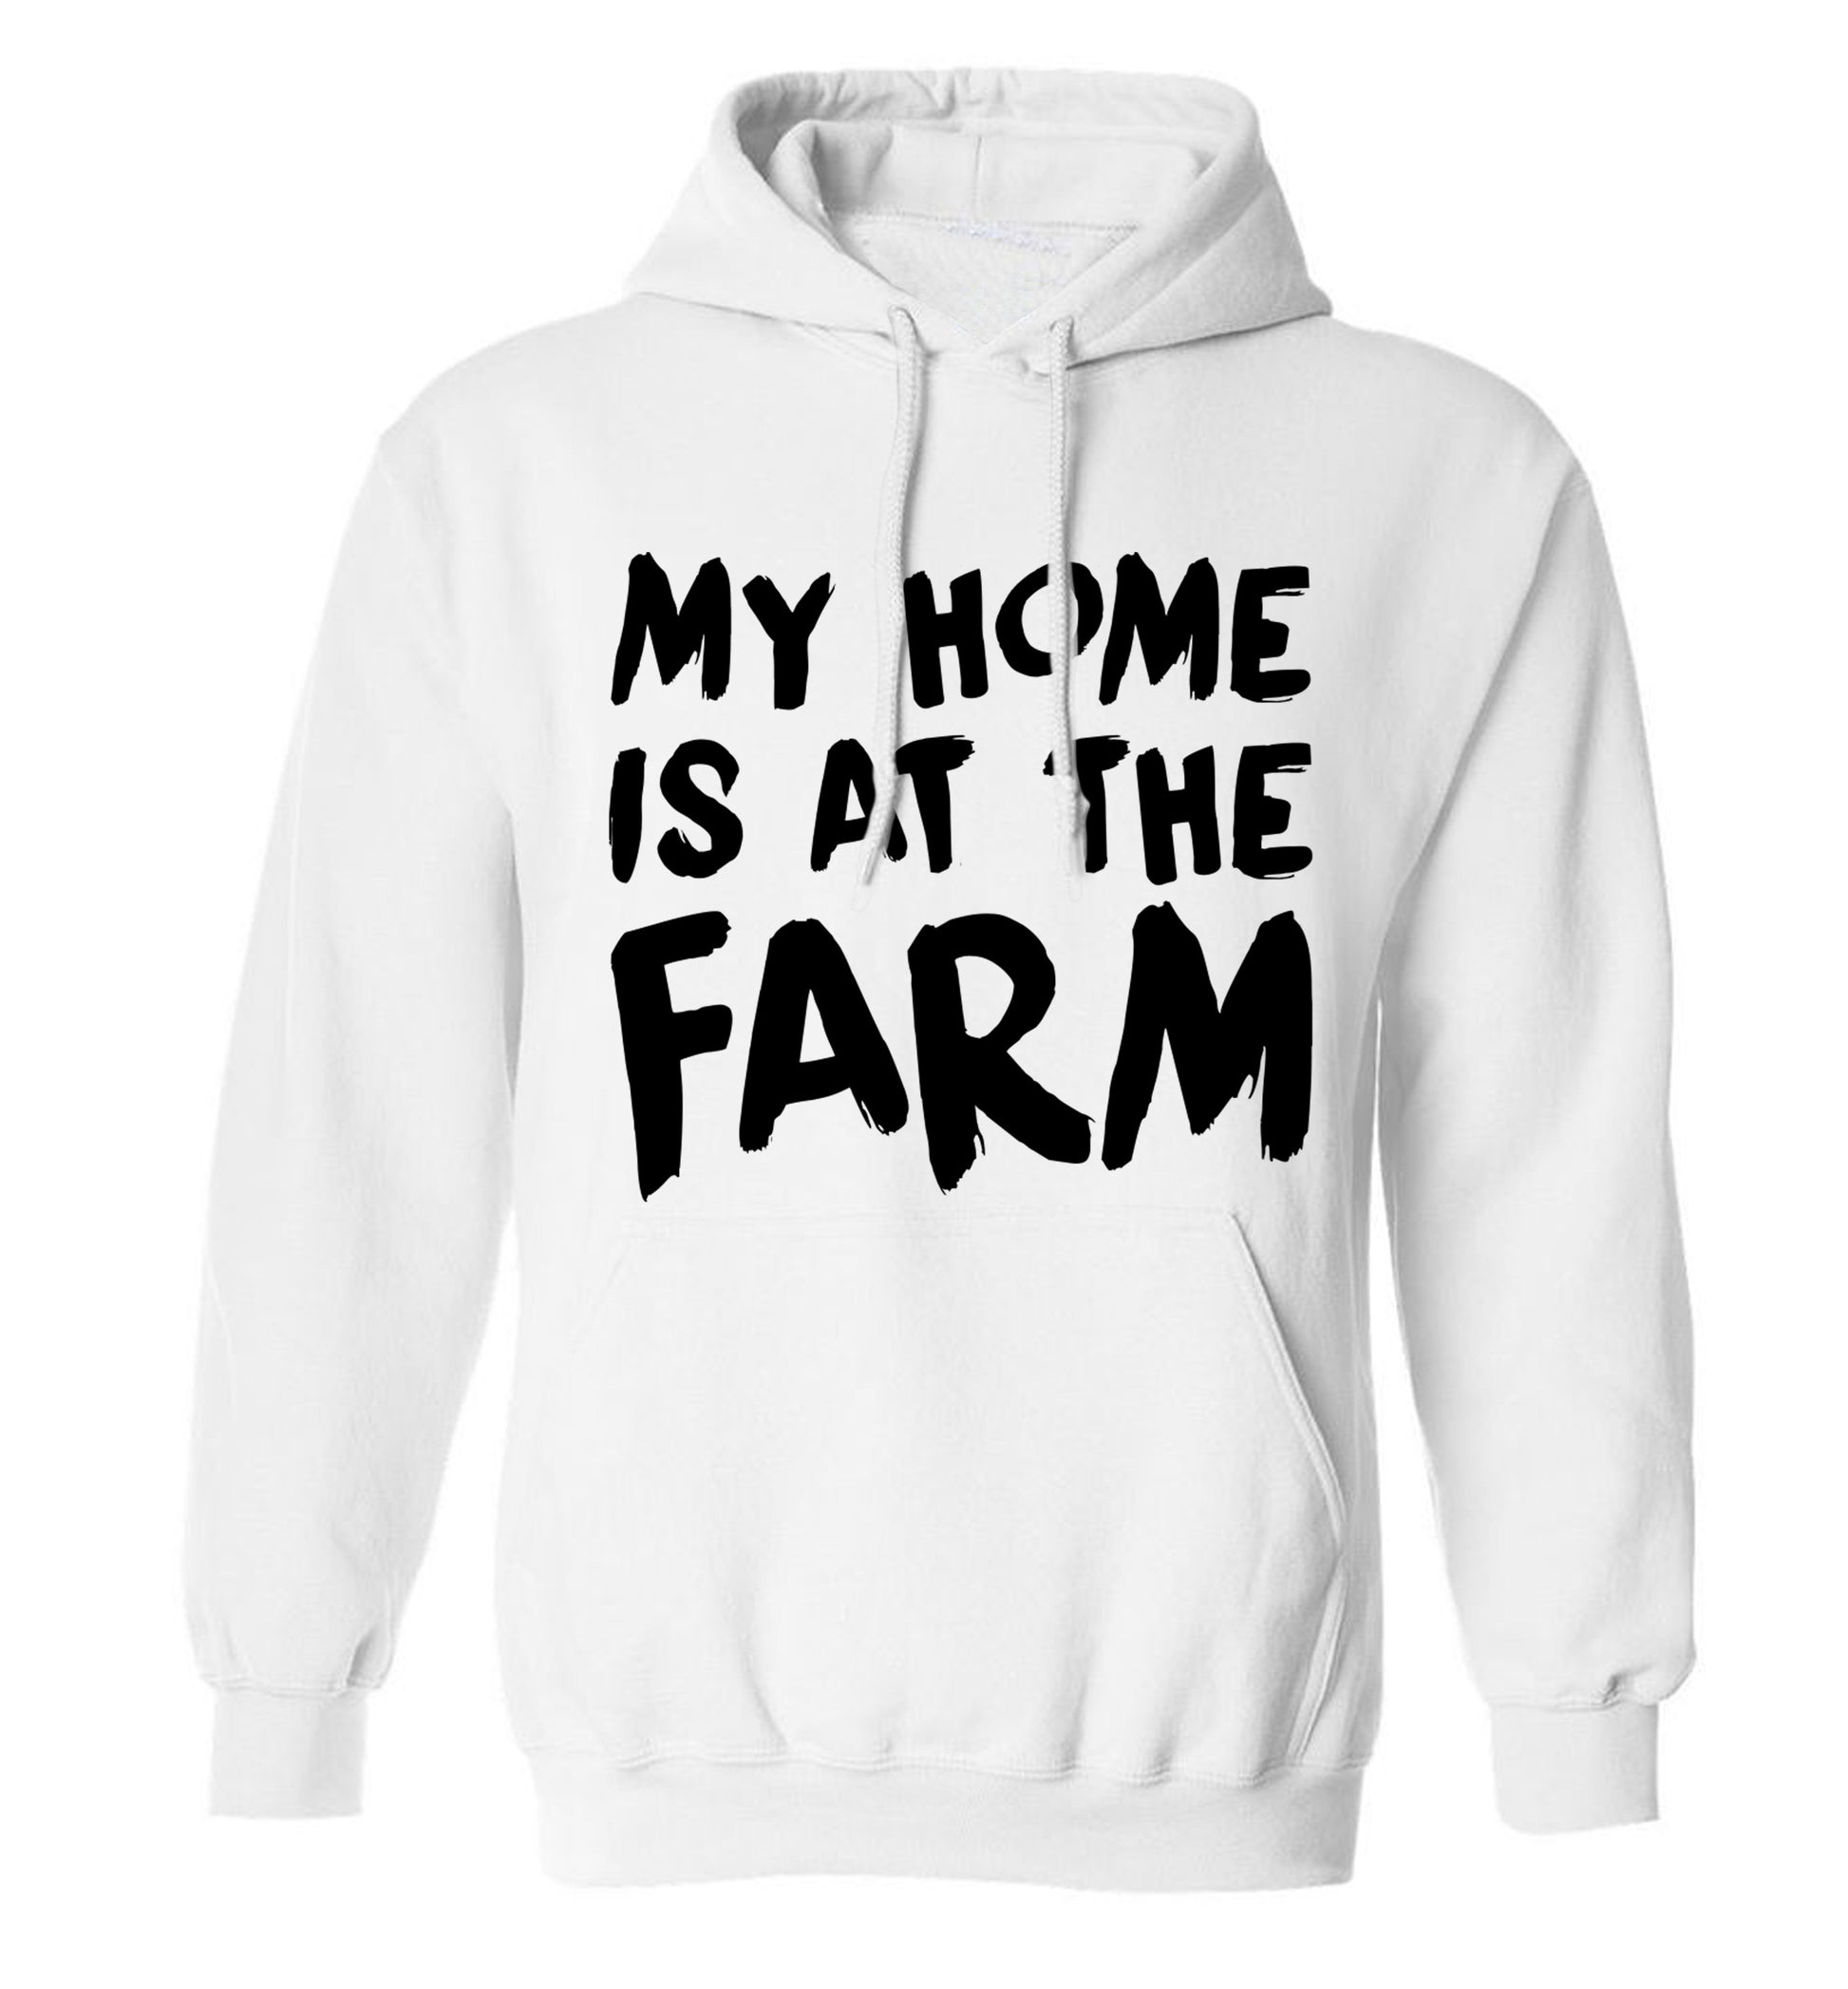 My home is at the farm adults unisex white hoodie 2XL